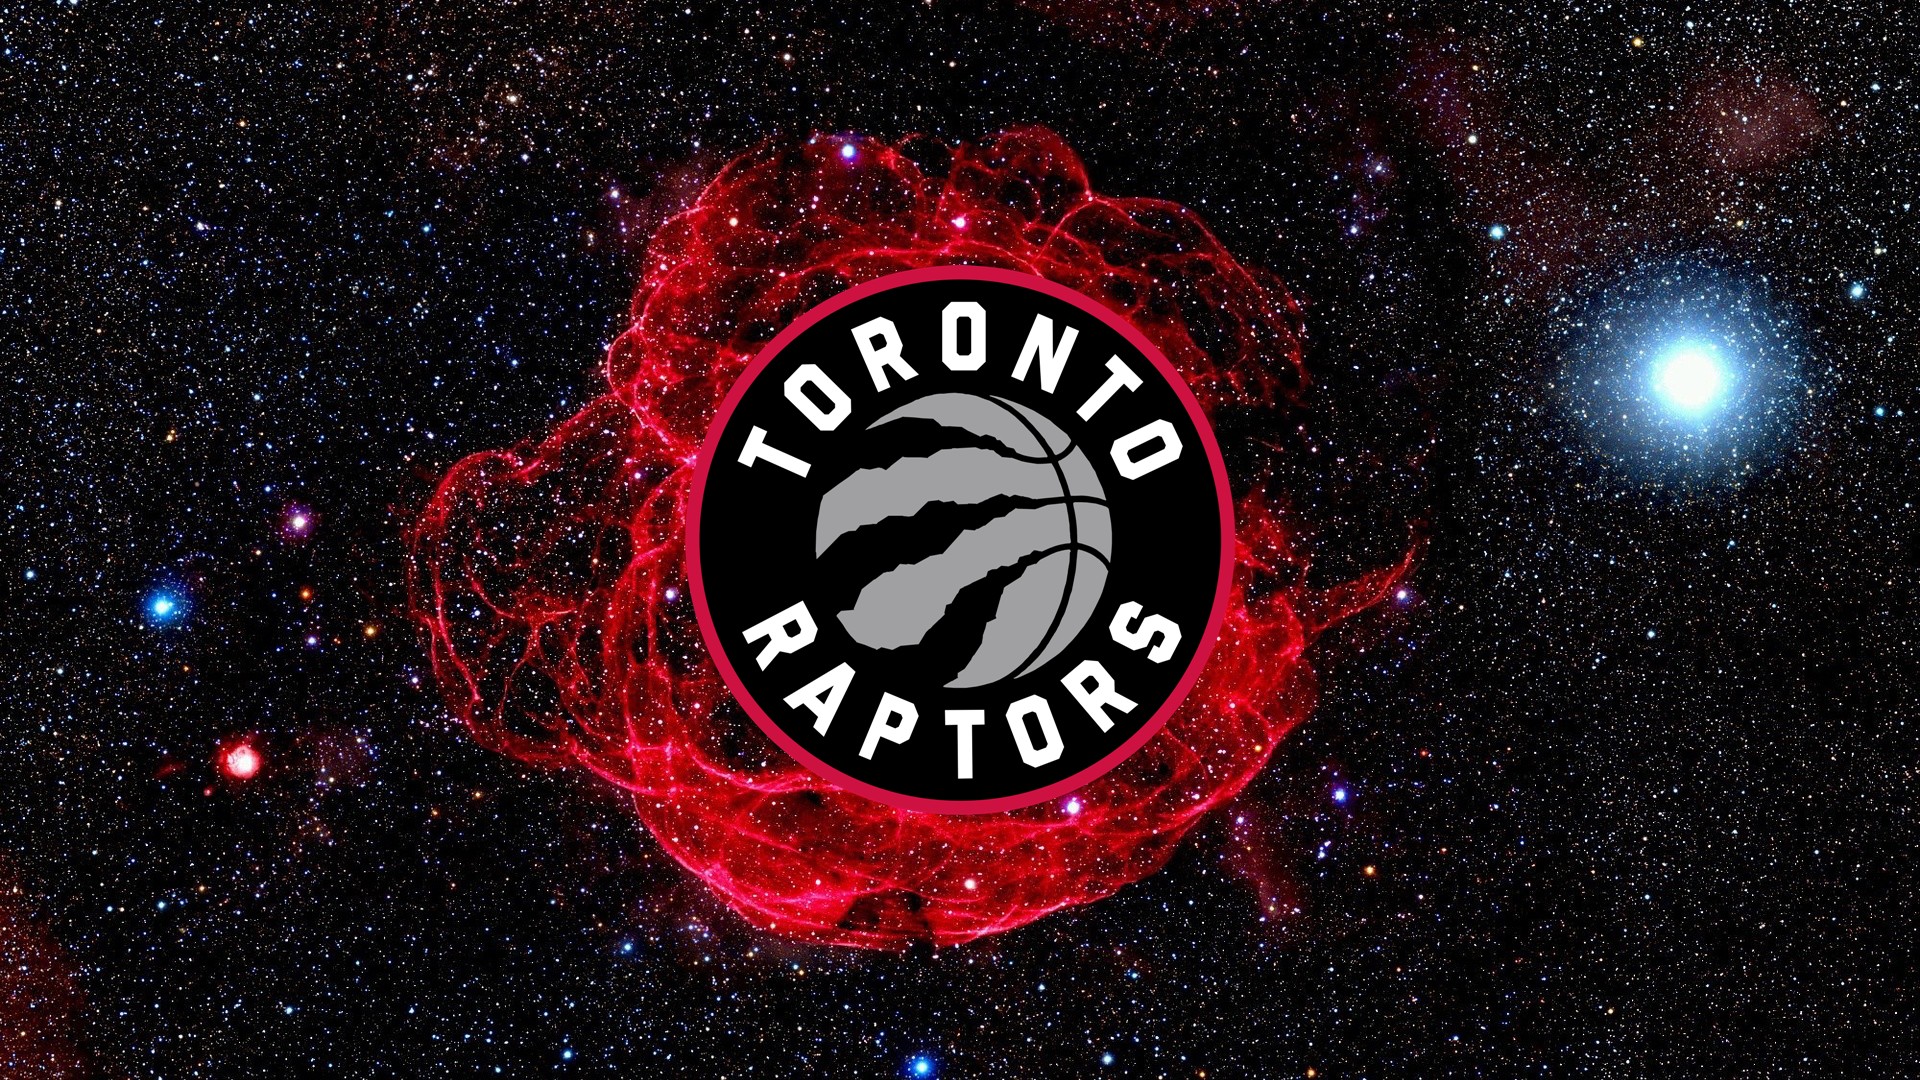 HD Toronto Raptors Backgrounds with image dimensions 1920x1080 pixel. You can make this wallpaper for your Desktop Computer Backgrounds, Windows or Mac Screensavers, iPhone Lock screen, Tablet or Android and another Mobile Phone device